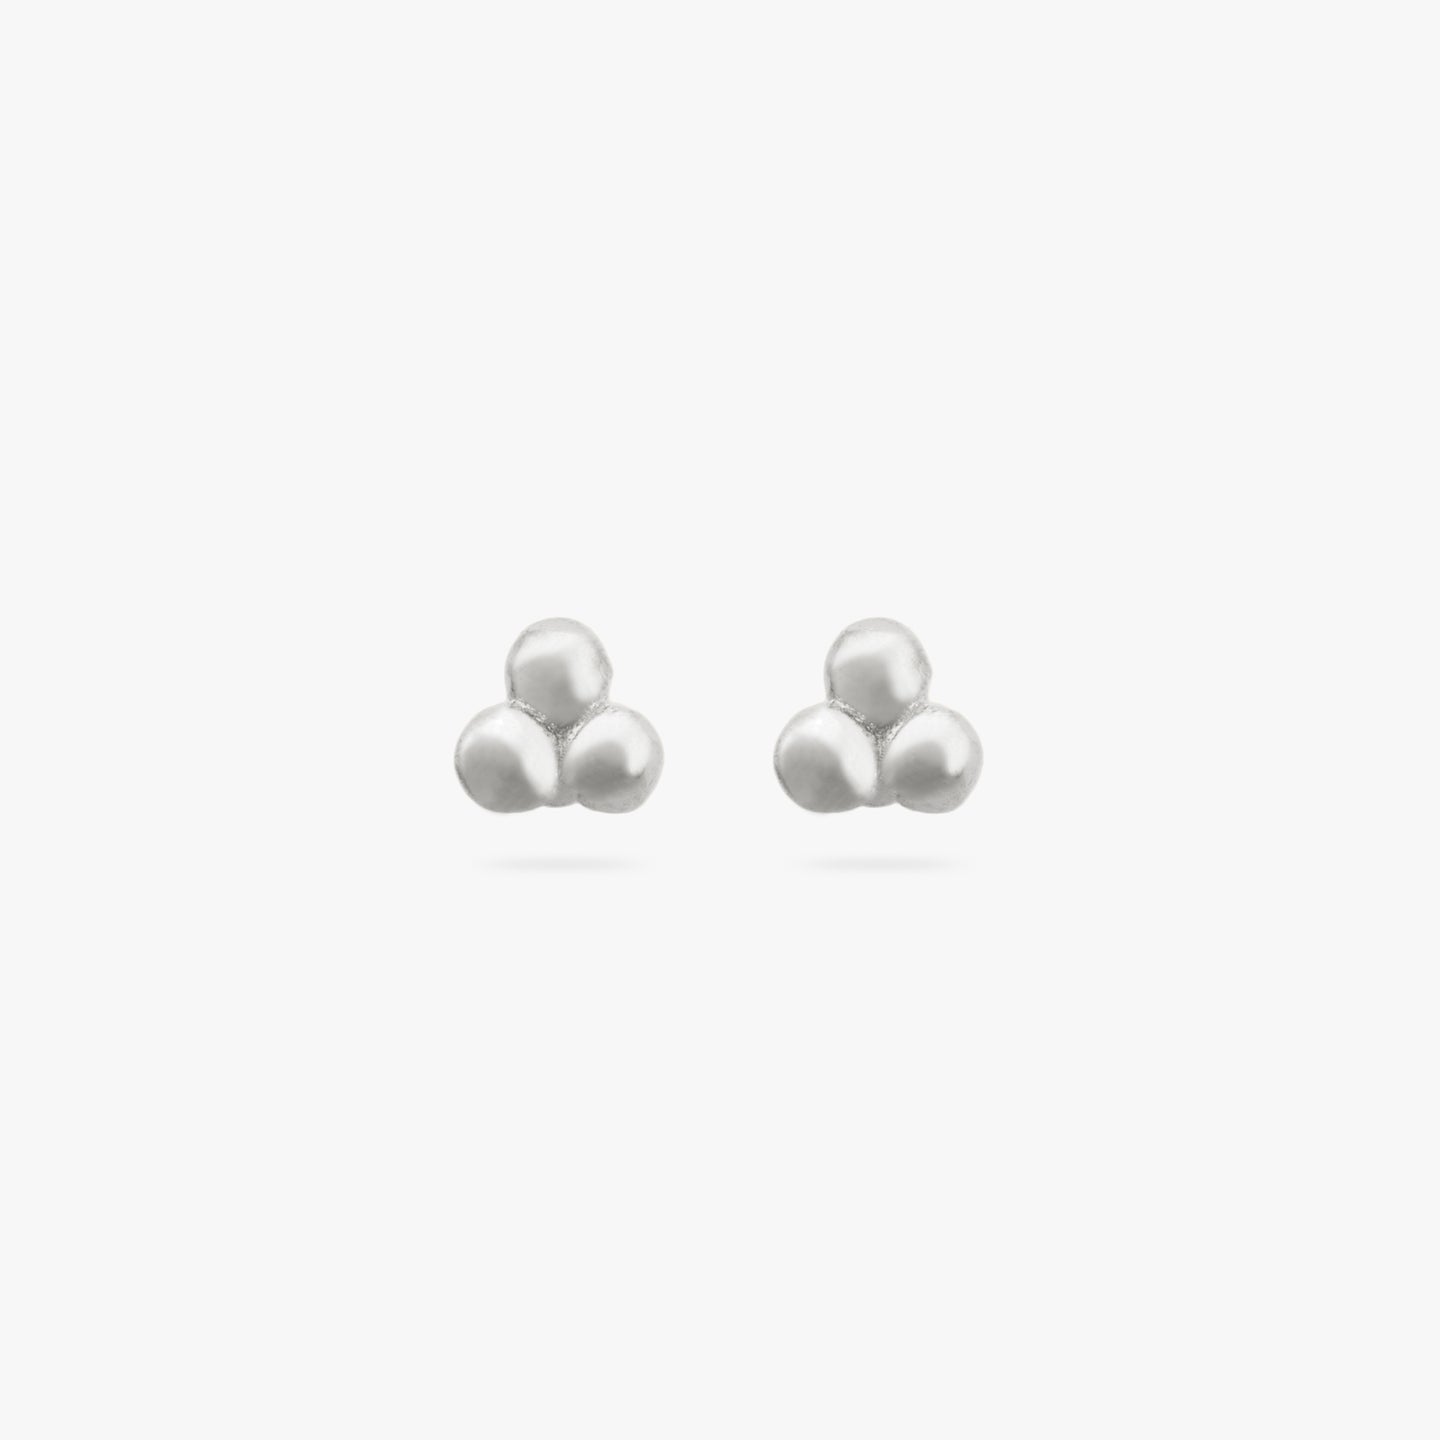 This is a pair of small silver studs of three beads arranged in a cluster [pair] color:null|silver